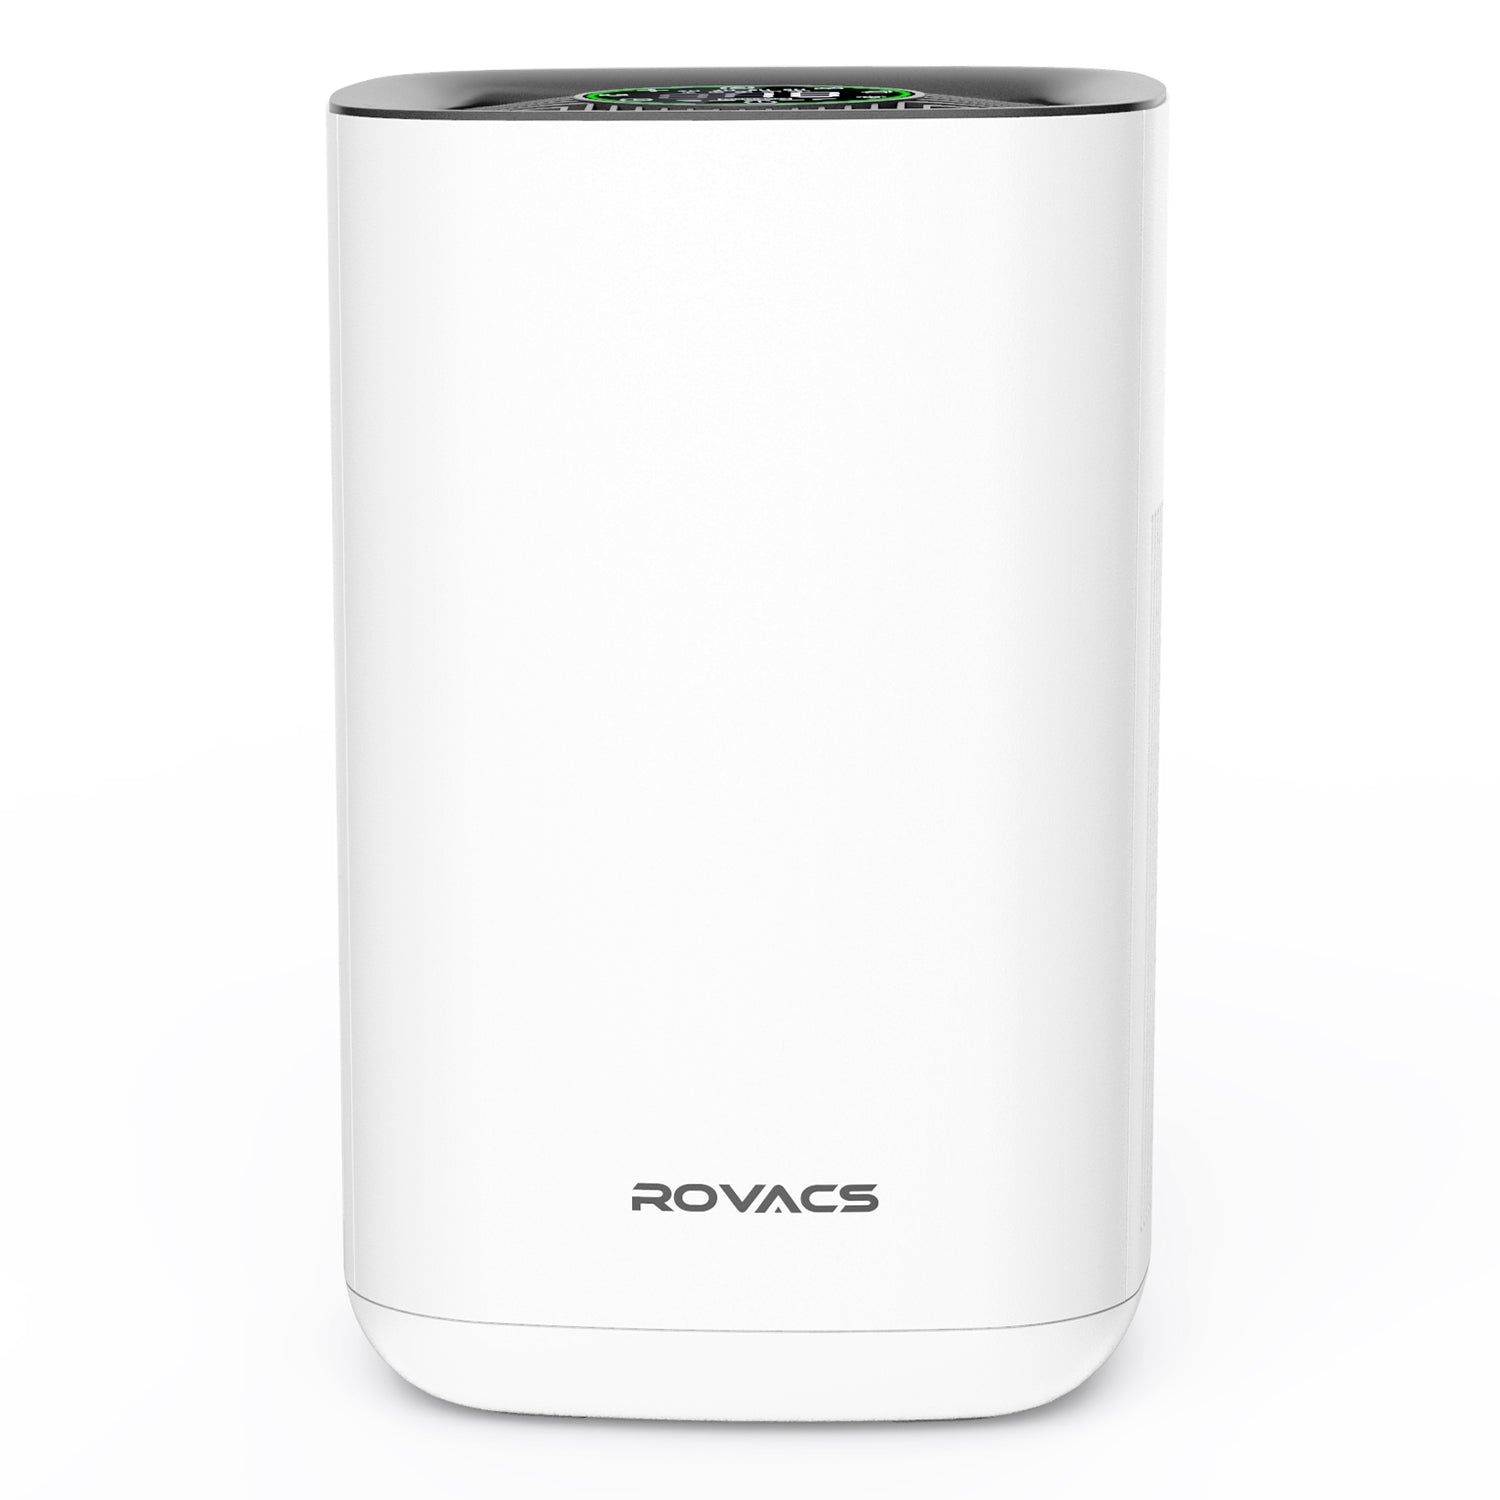 ROVACS Air Purifier RV220, Real HEPA Filter H13, covers 14-24 m2 ( 258ft2 ) , CADR 130 cfm, purifies 99.97% of allergic particles, pollen, smoke, pet dander, odors, Rated Voltage: DC24V 1.0A, Rated Power: 24W, Noise: 32-52dB